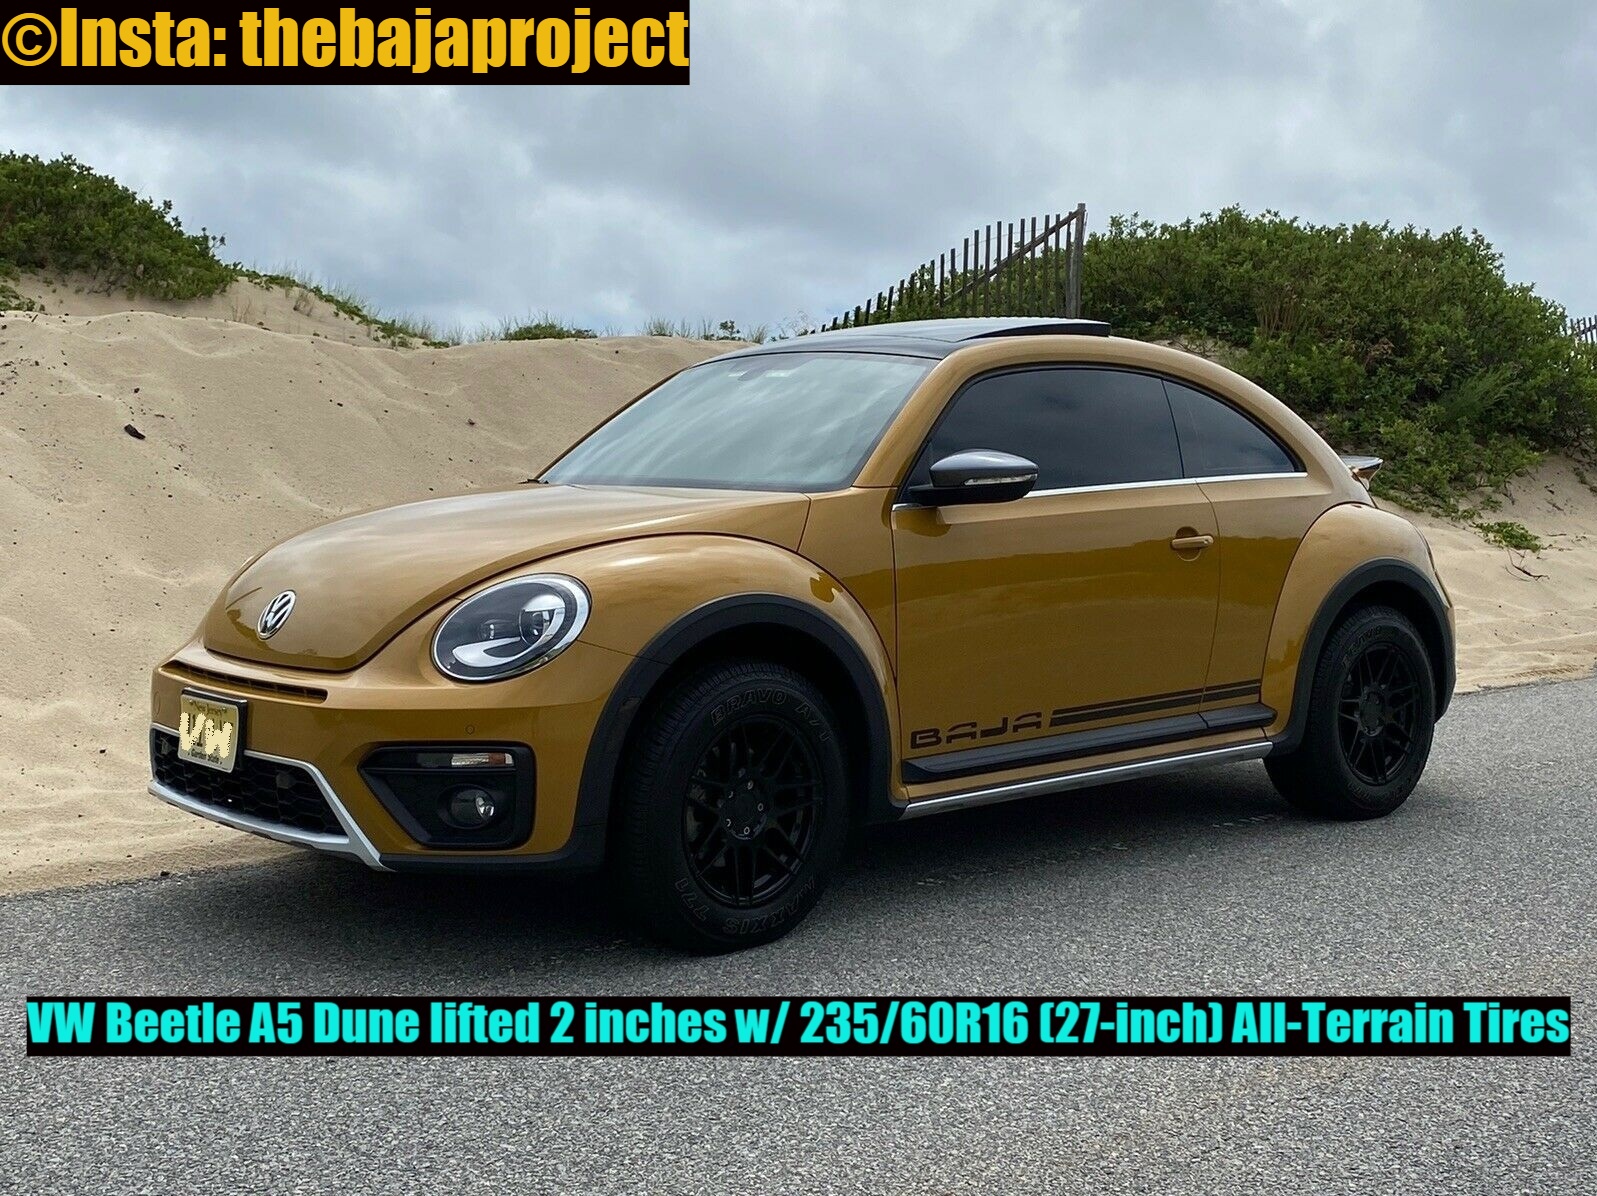 The cool Beetle is lifted w/ firmer high-performance German coils.  Follow more @Insta: thebajaproject